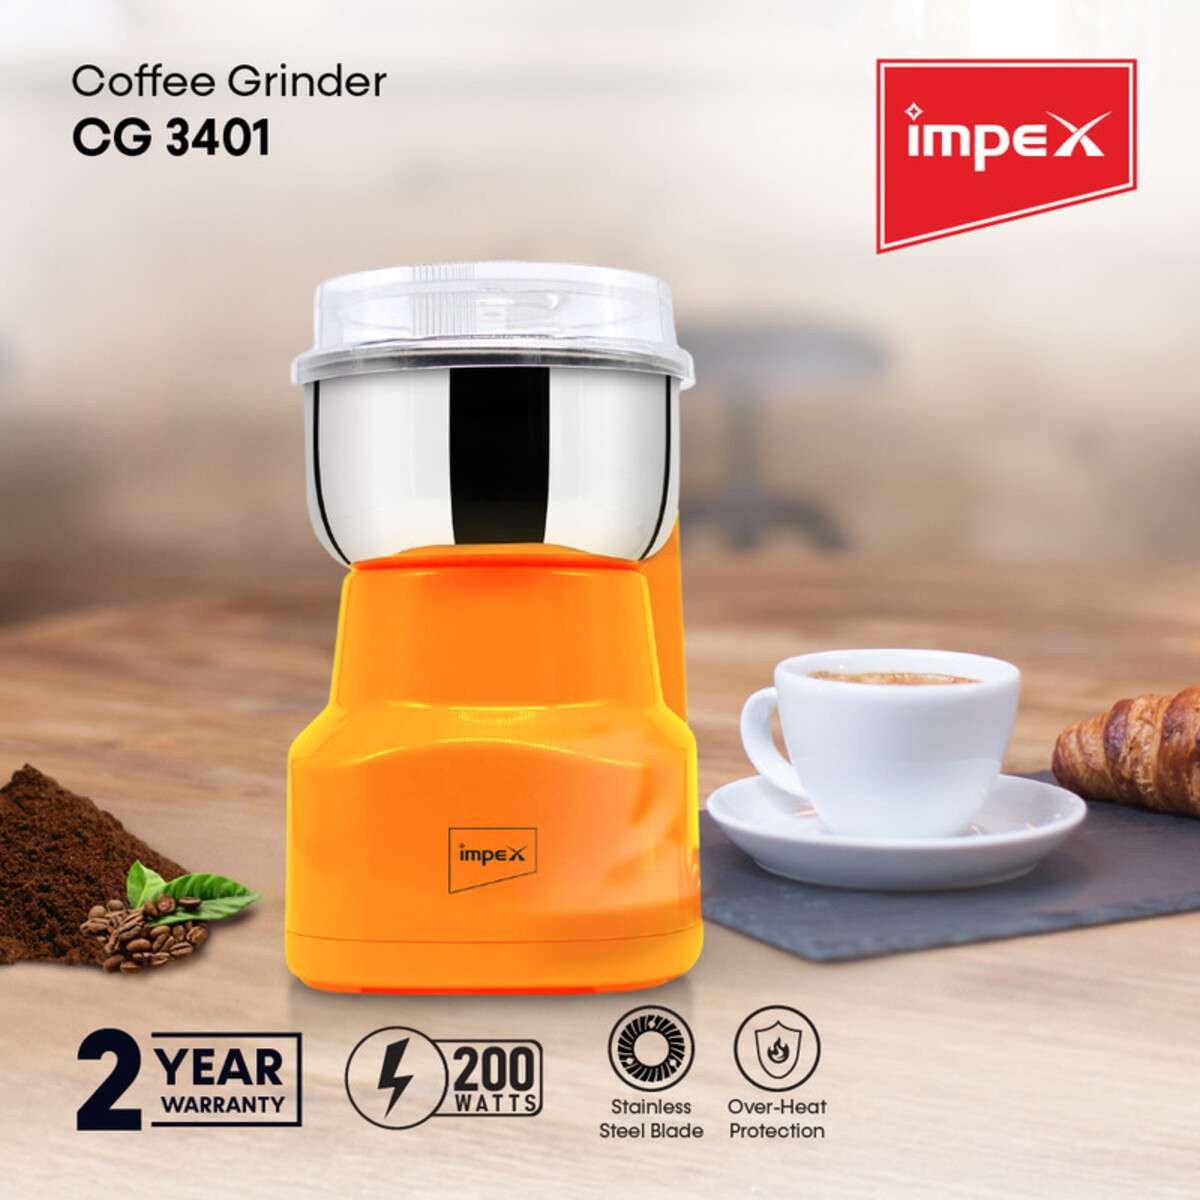 Impex CG 3401 N Coffee Grinder With Overheat protection